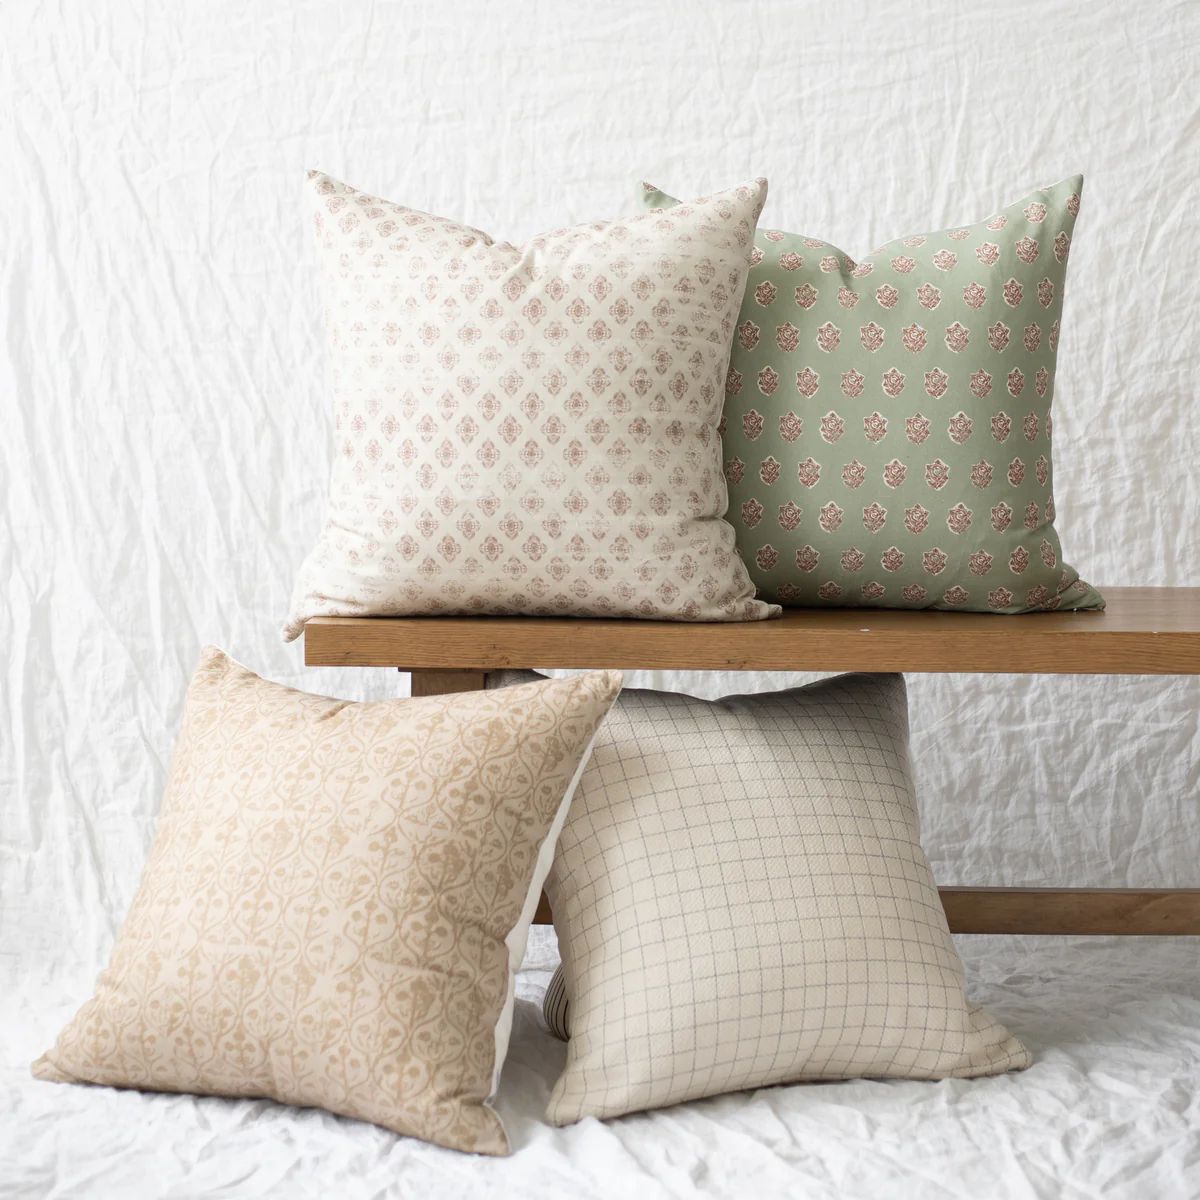 Wells - 4 pack Pillow Covers - 22" | Woven Nook